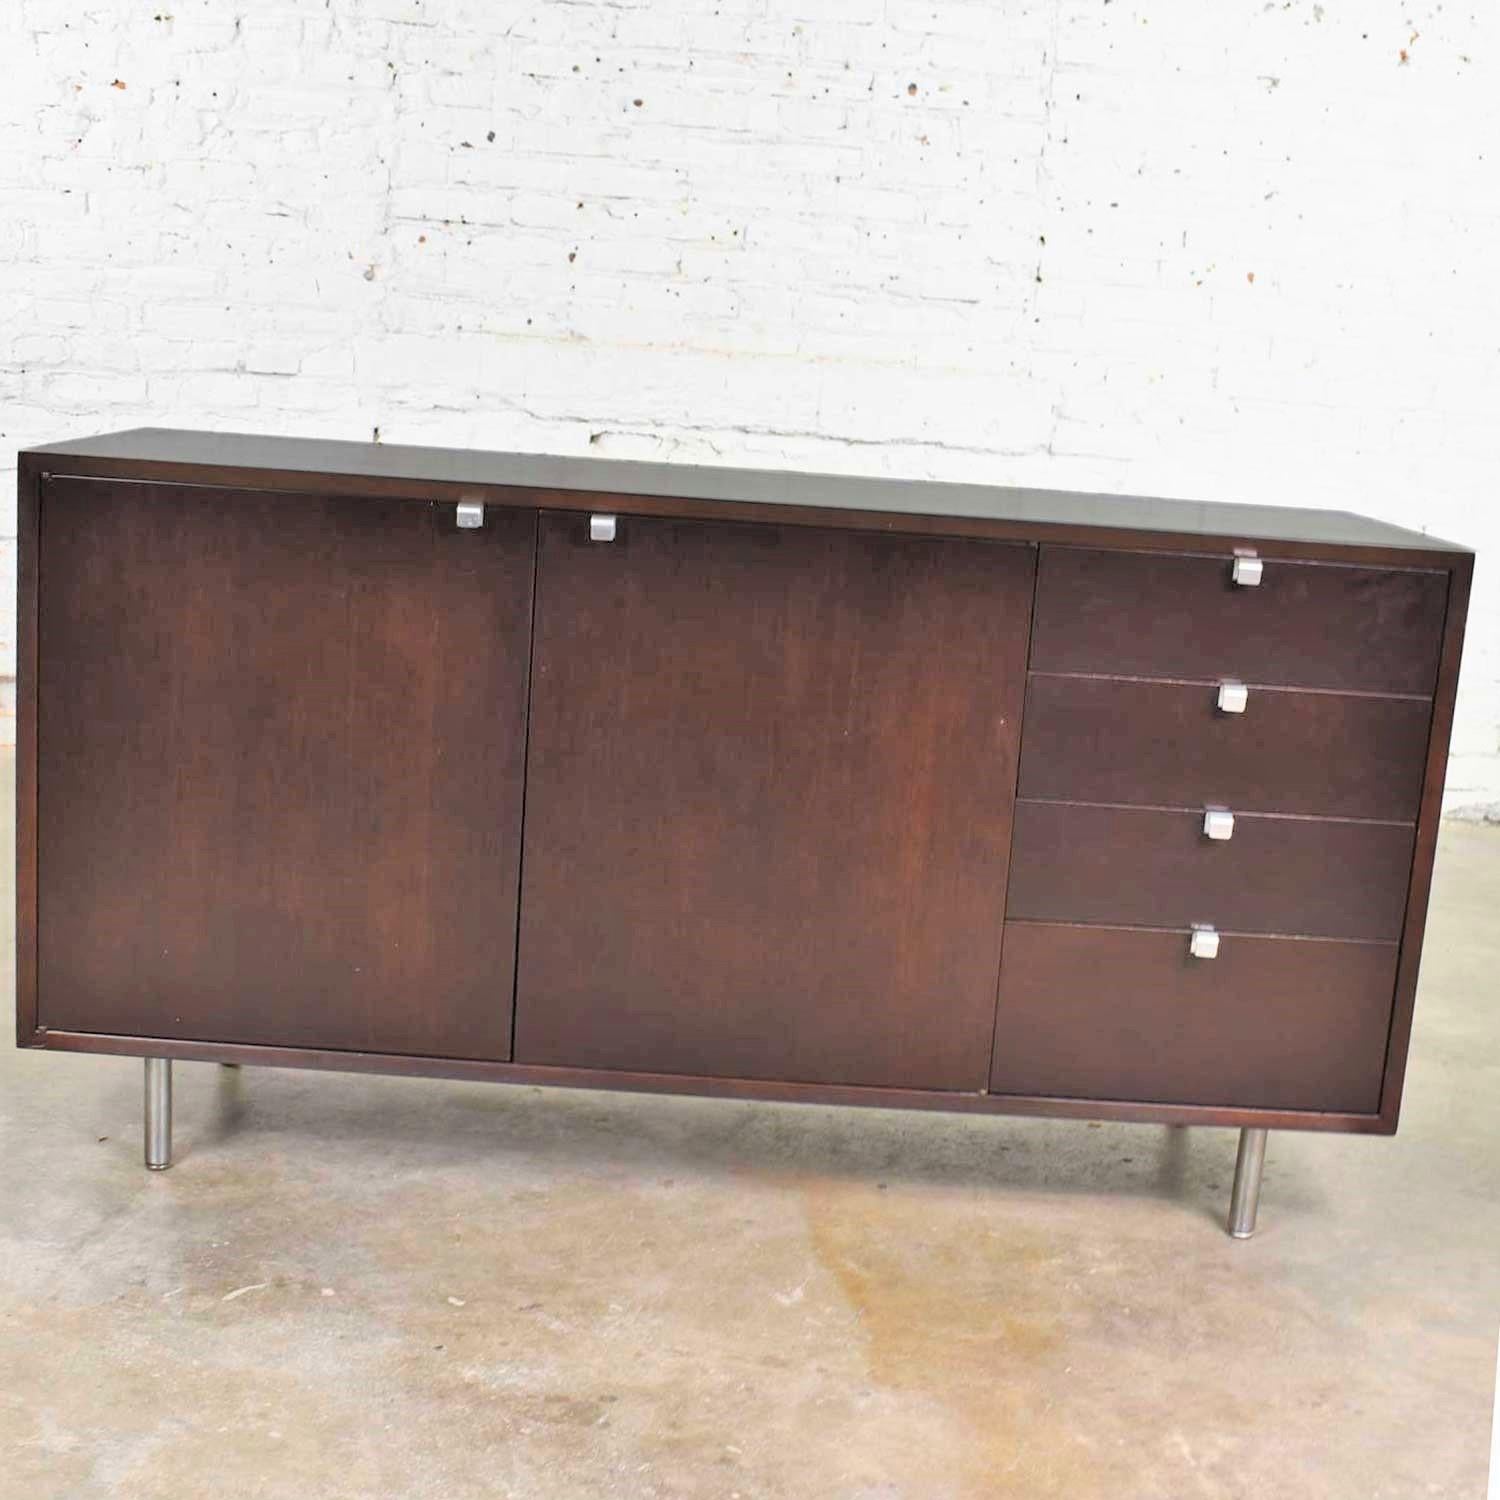 20th Century Early Basic Cabinet Series Walnut Sideboard Credenza by George Nelson for Herman